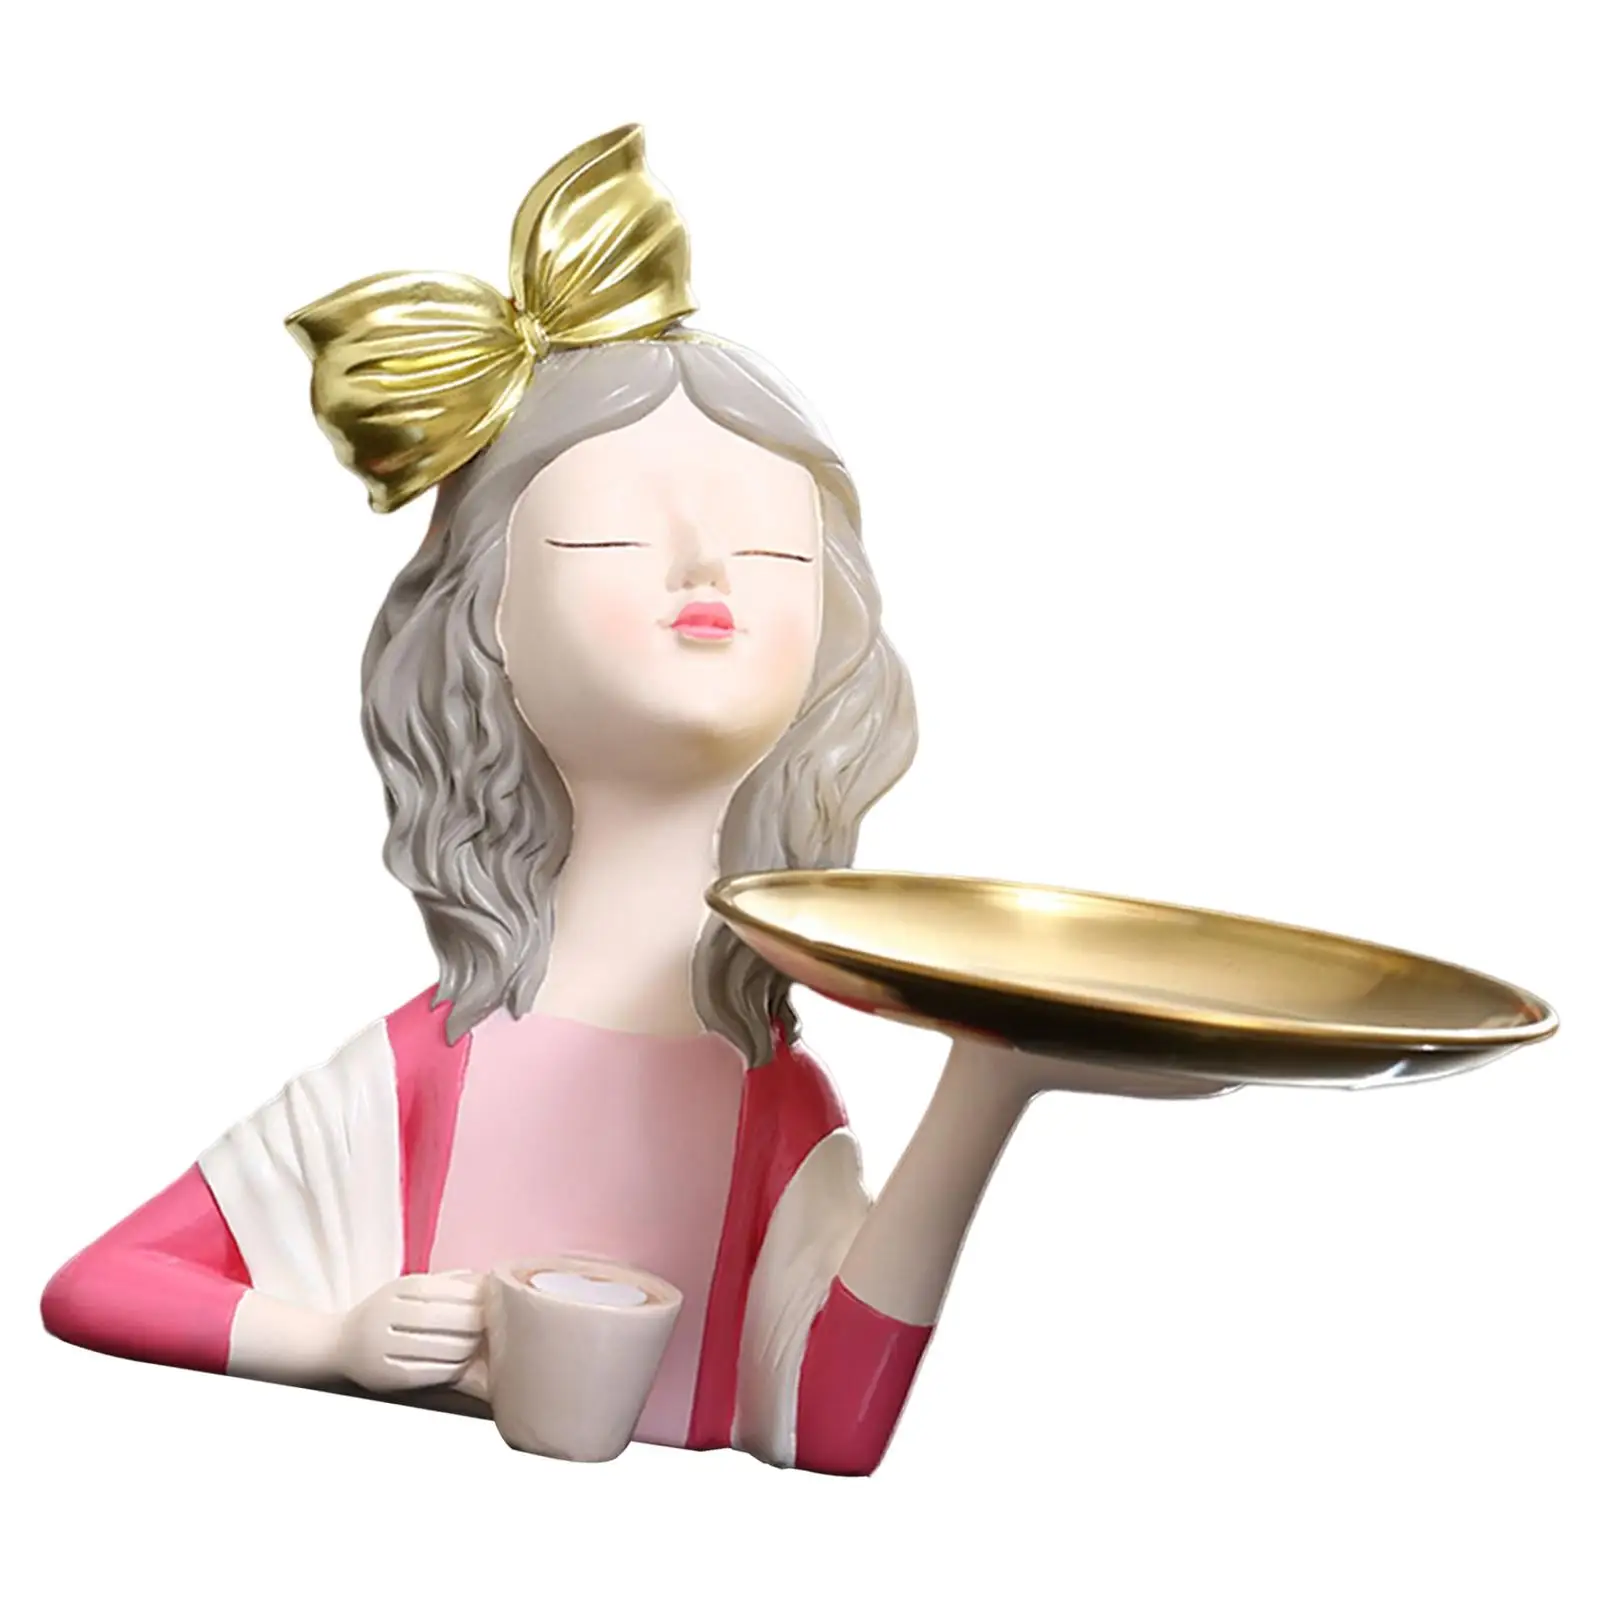 Exquisite Resin Girls Statue Figurine Ornament, Wedding Home Decor Crafts for , Housewarming, Wedding, Christmas Gifts